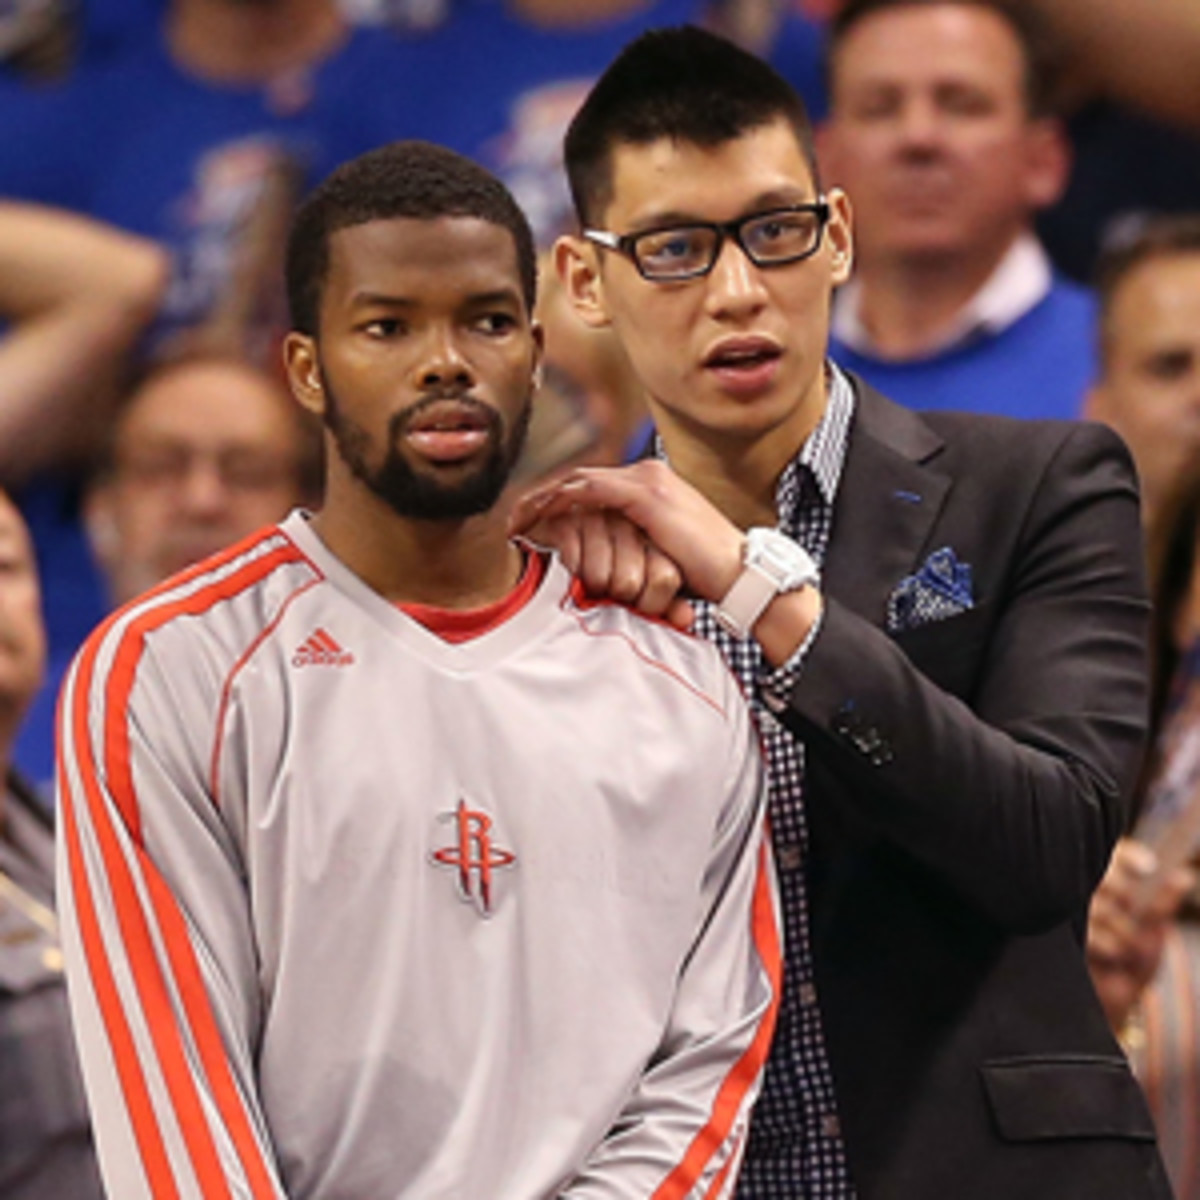 Jeremy Lin cheered on Aaron Brooks and the Rockets while sidelined with an injury in Game 5. (Christian Petersen/Getty Images)